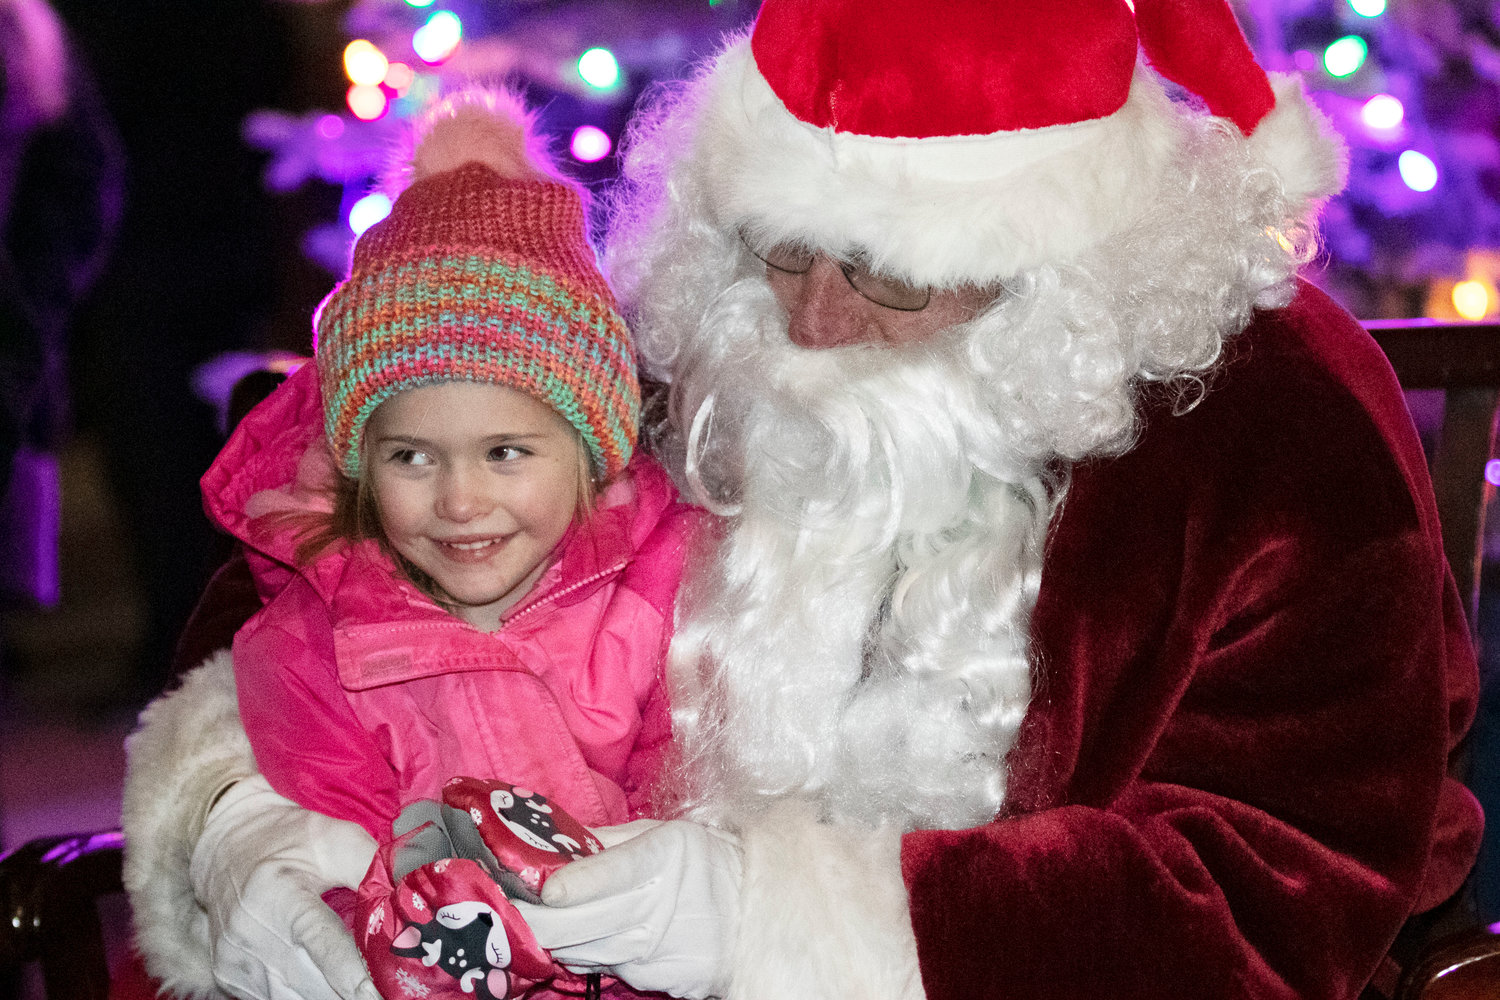 Emma Venagro shares a laugh with Santa at the 2021 East Providence City Hall Tree Lighting ceremony.